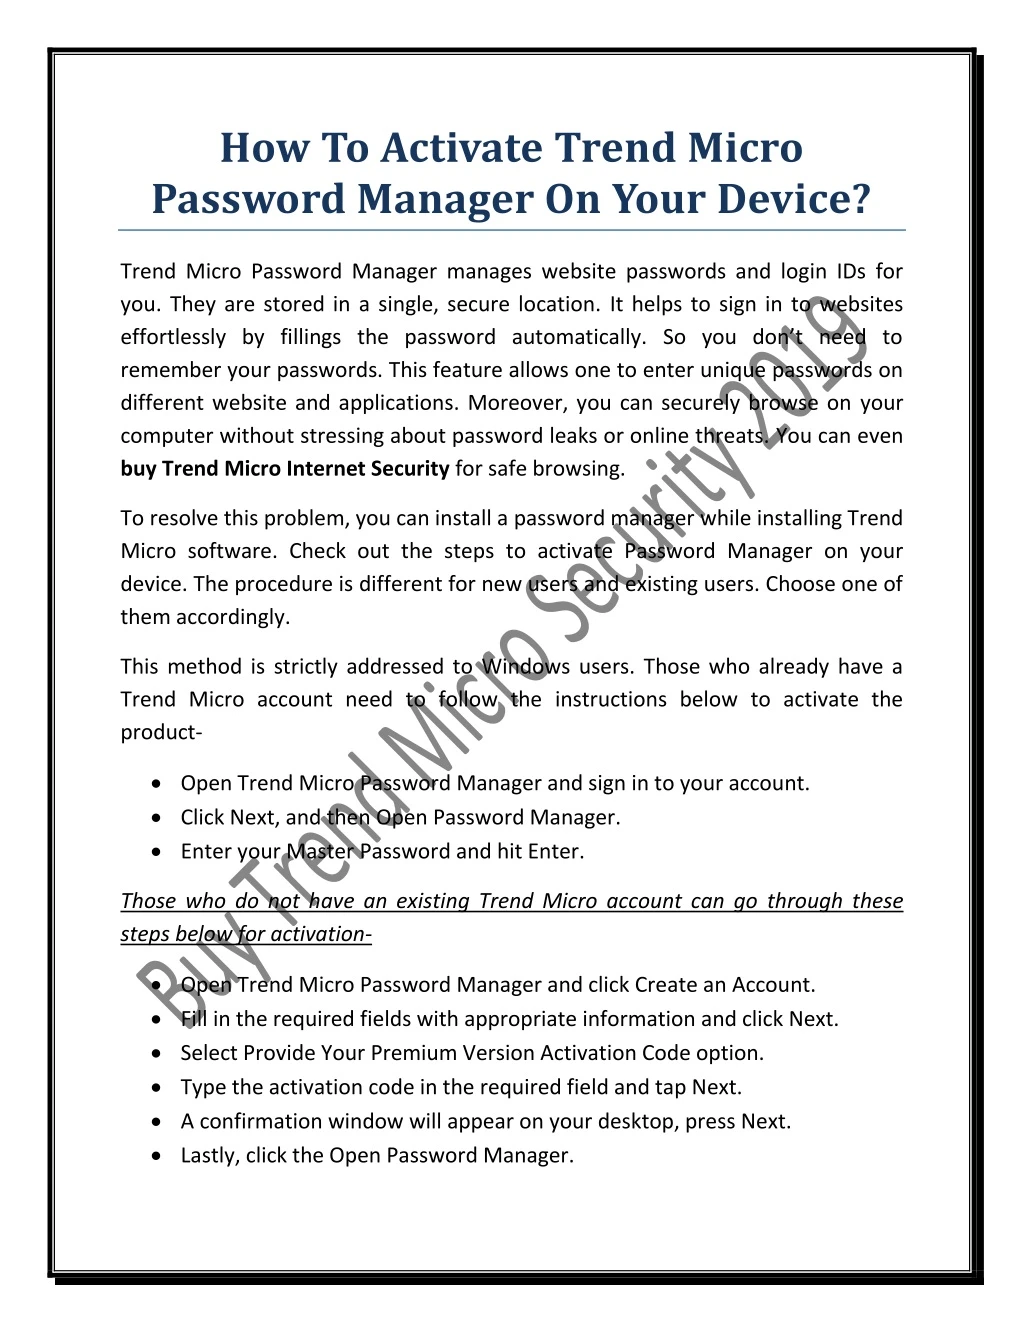 how to activate trend micro password manager